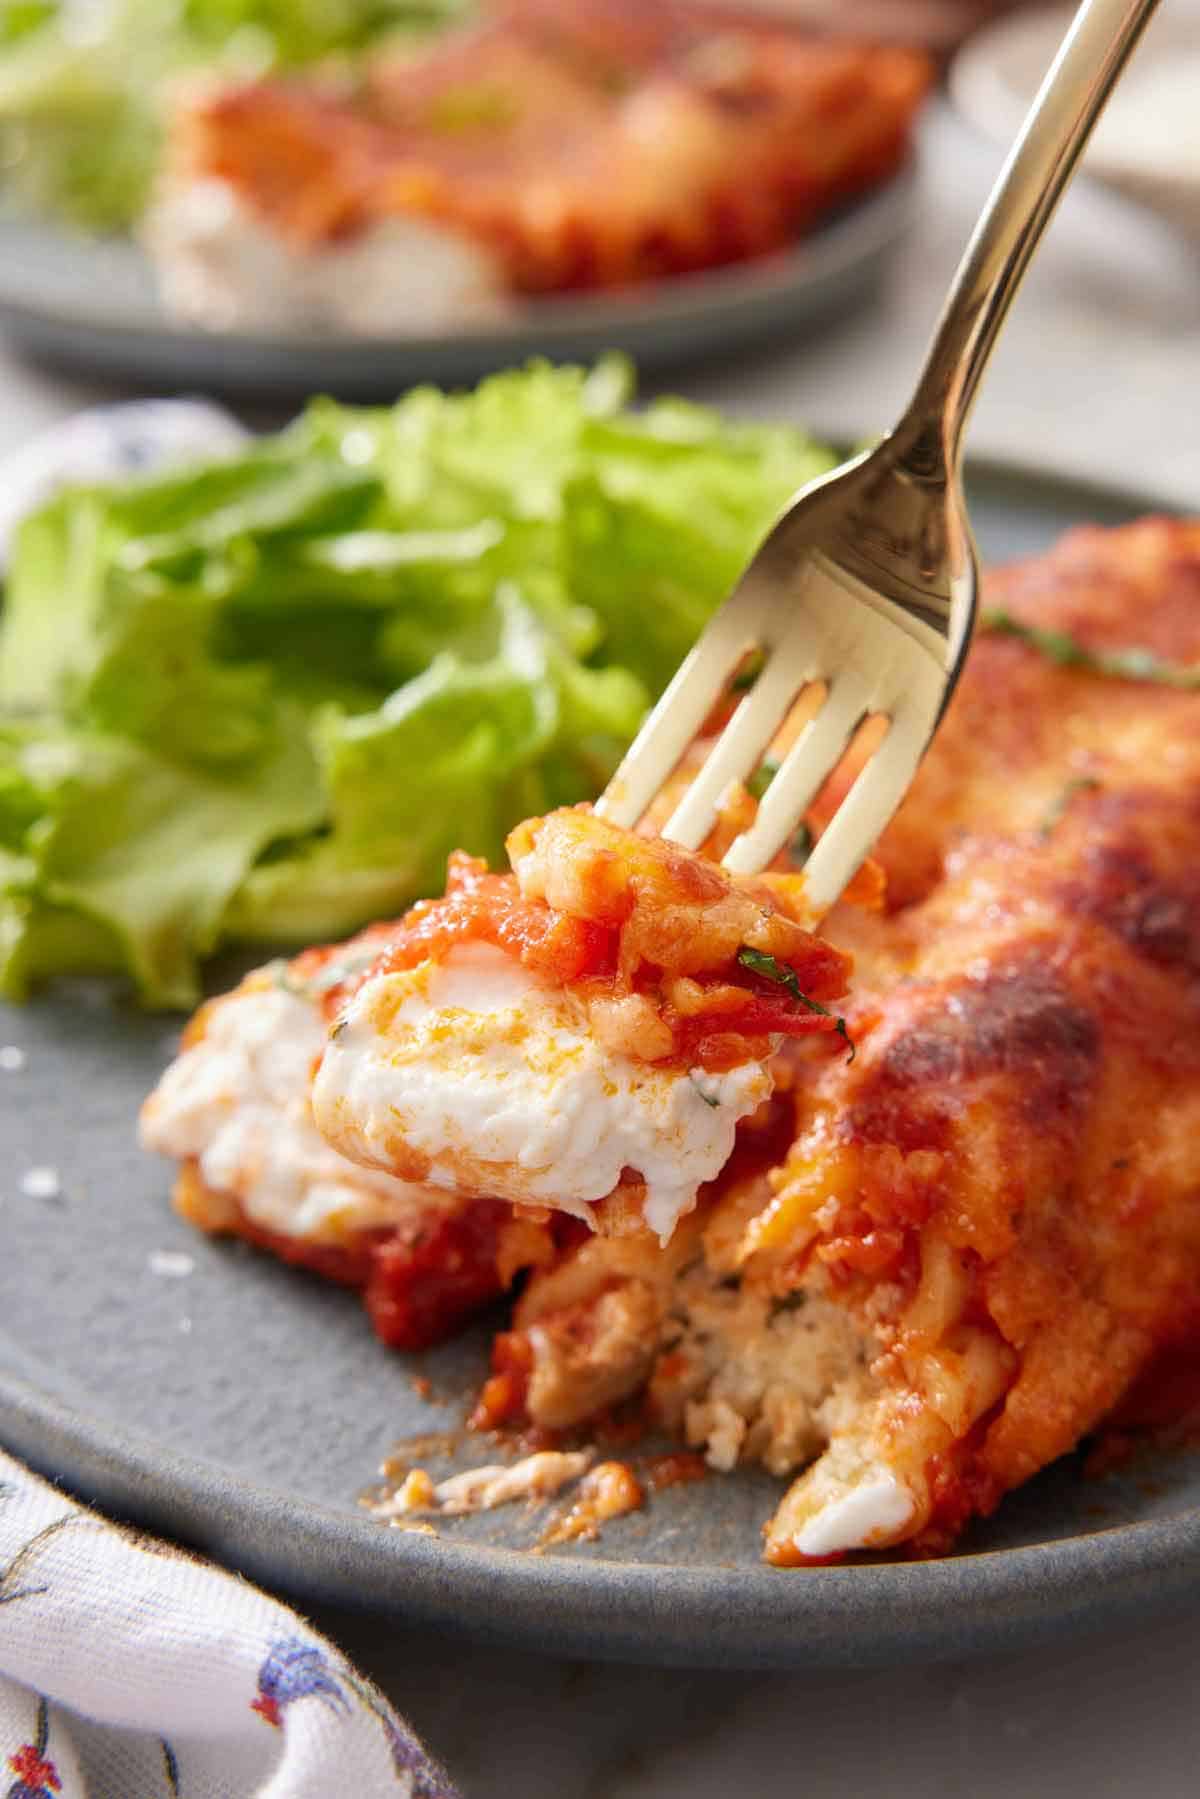 A fork lifting a bite of manicotti from a plate.